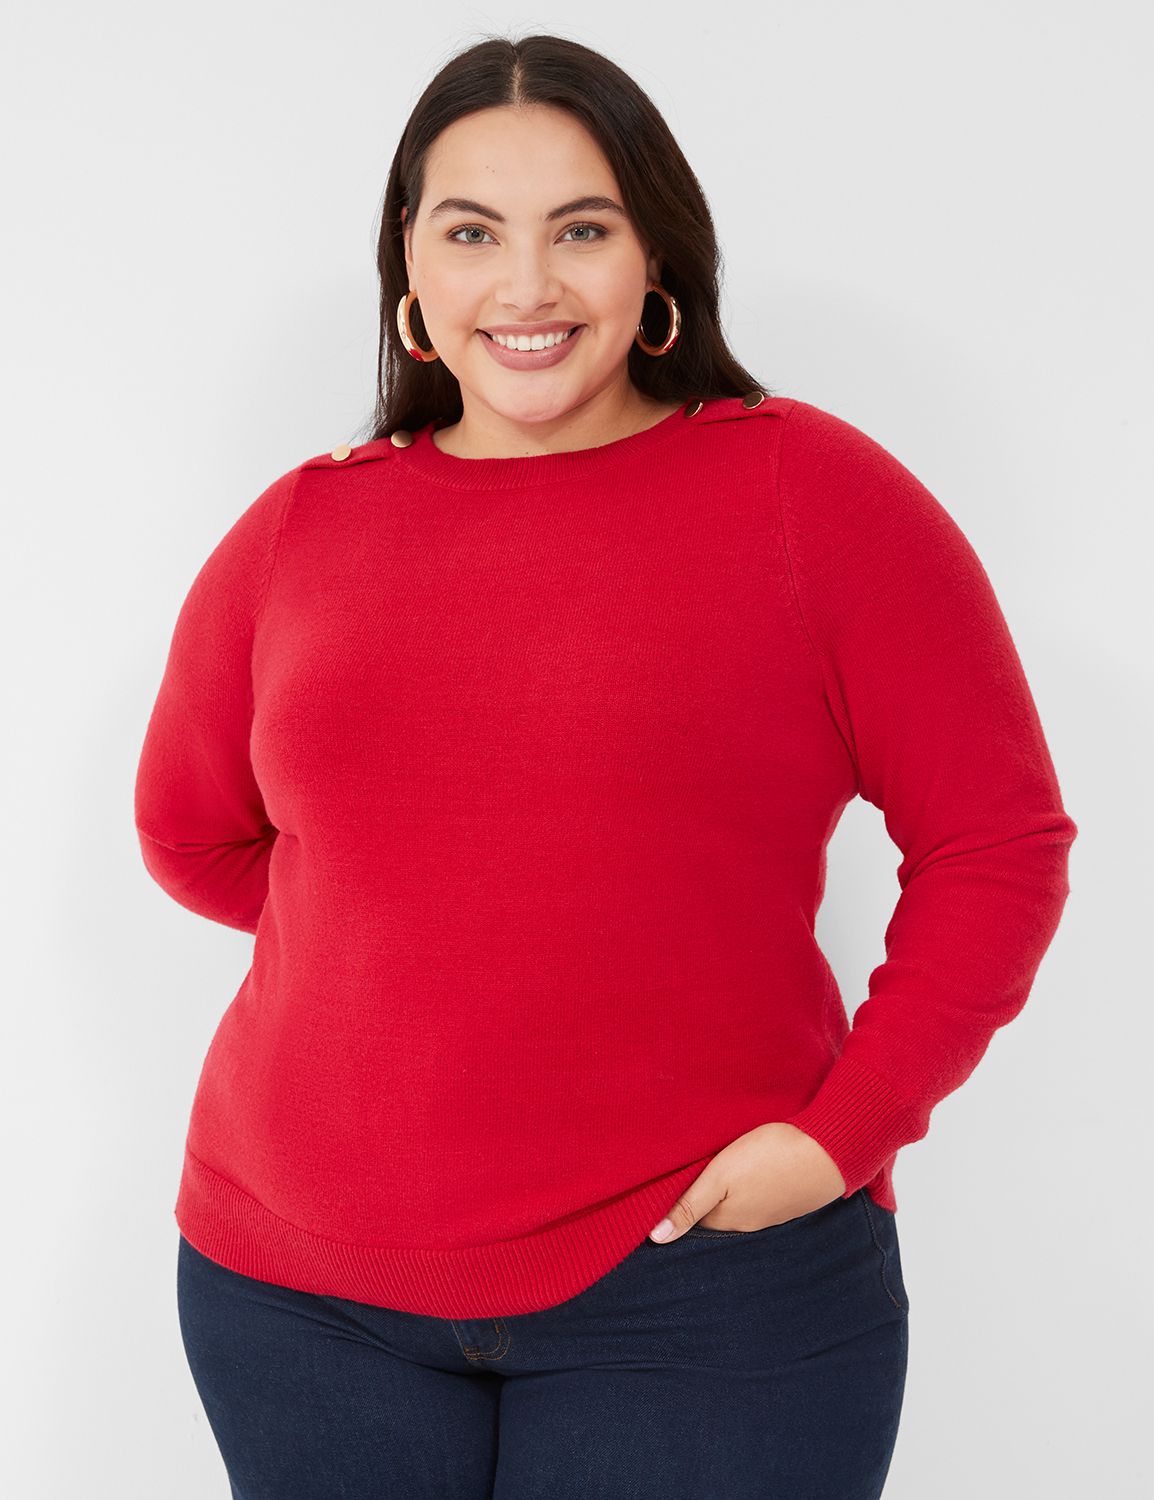 Classic Long Sleeve Crew Neck Butto | LaneBryant